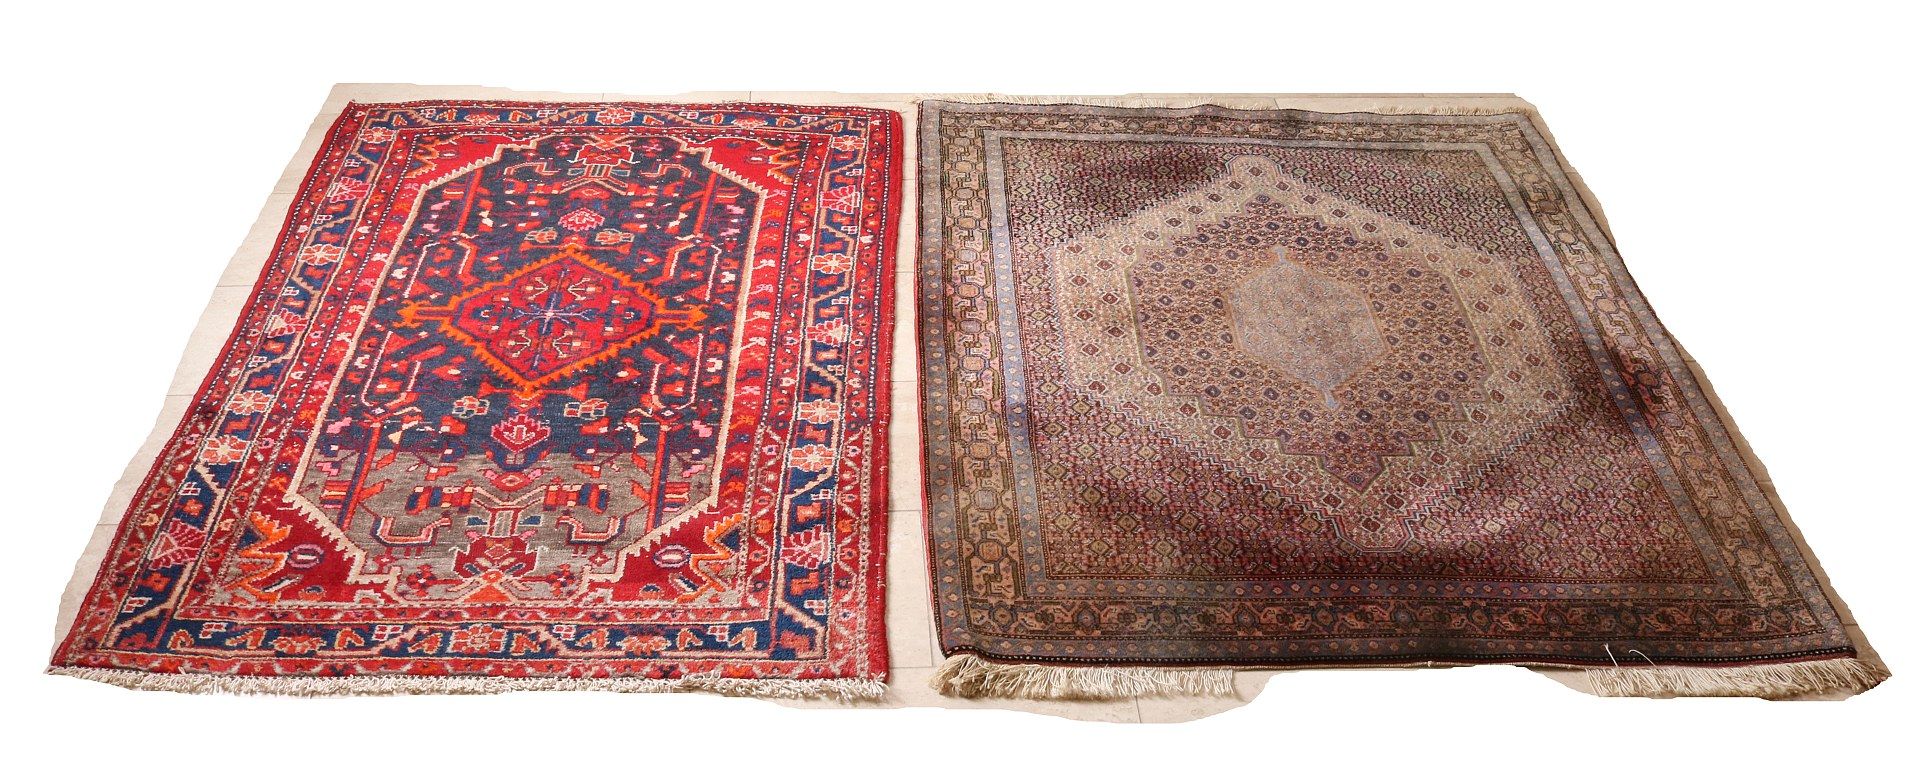 Two old Persian rugs